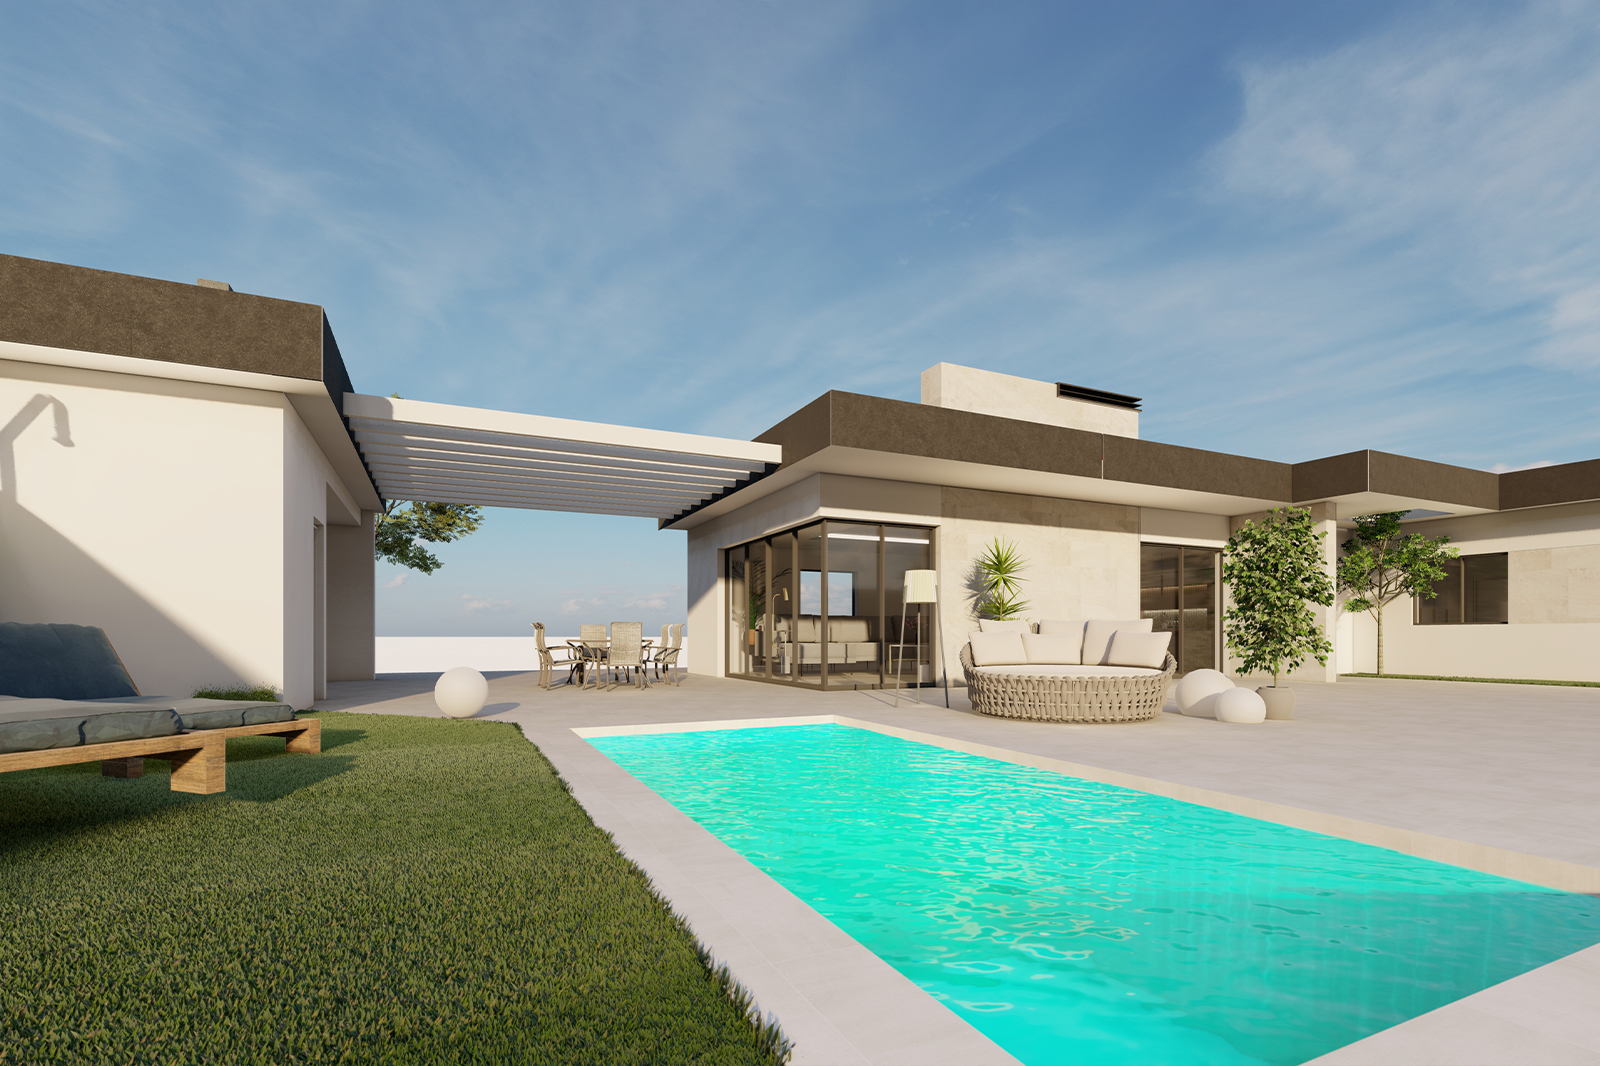 Single family house project in Murcia